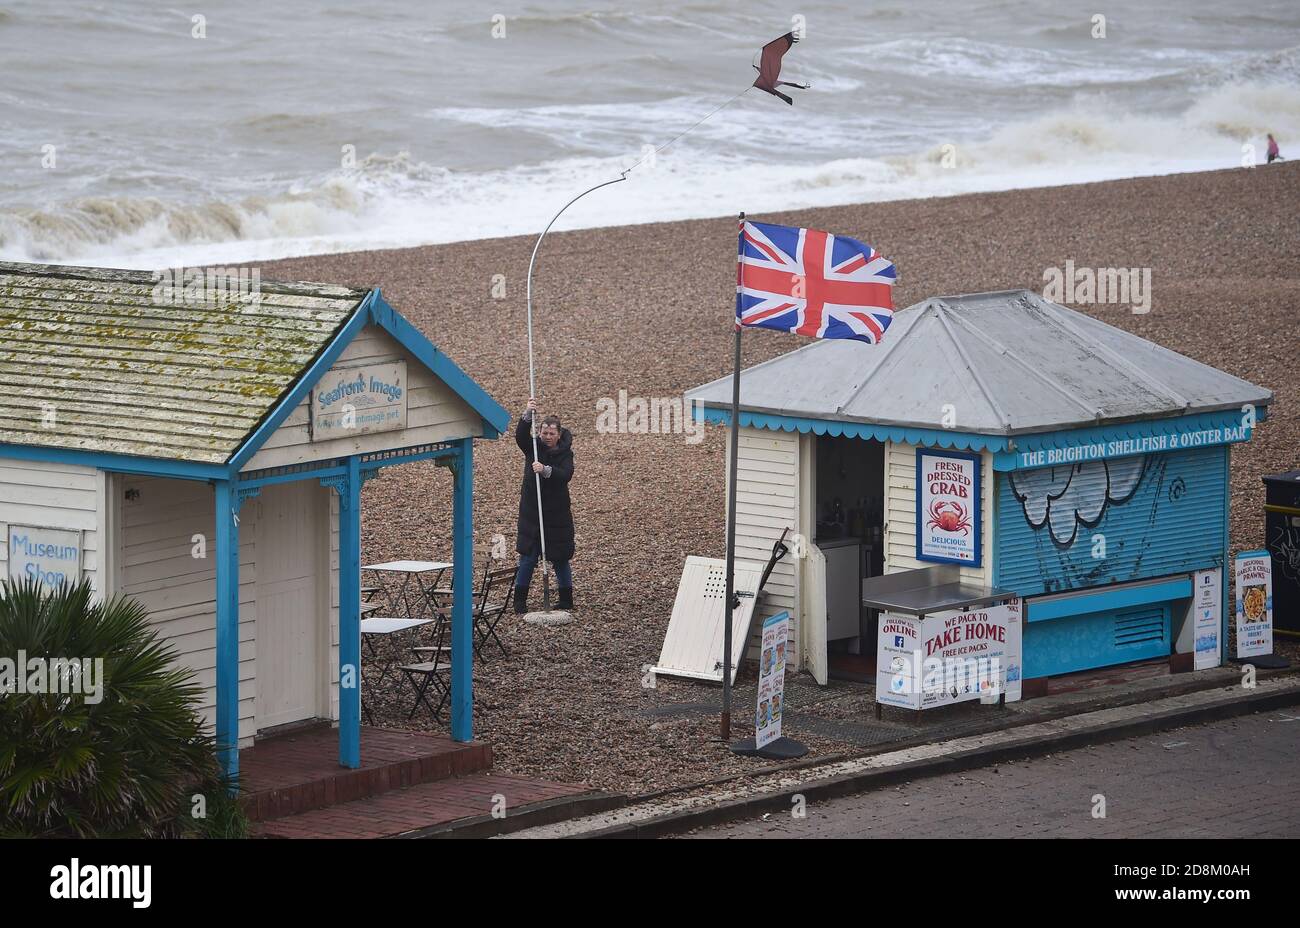 Brighton UK 31st October 2020 - A Brighton seafront stall holder battles the weather as she sets up for the day as Storm Aiden is forecast to affect parts of Britain with warnings of big winds and possible damage to property  : Credit Simon Dack / Alamy Live News Stock Photo